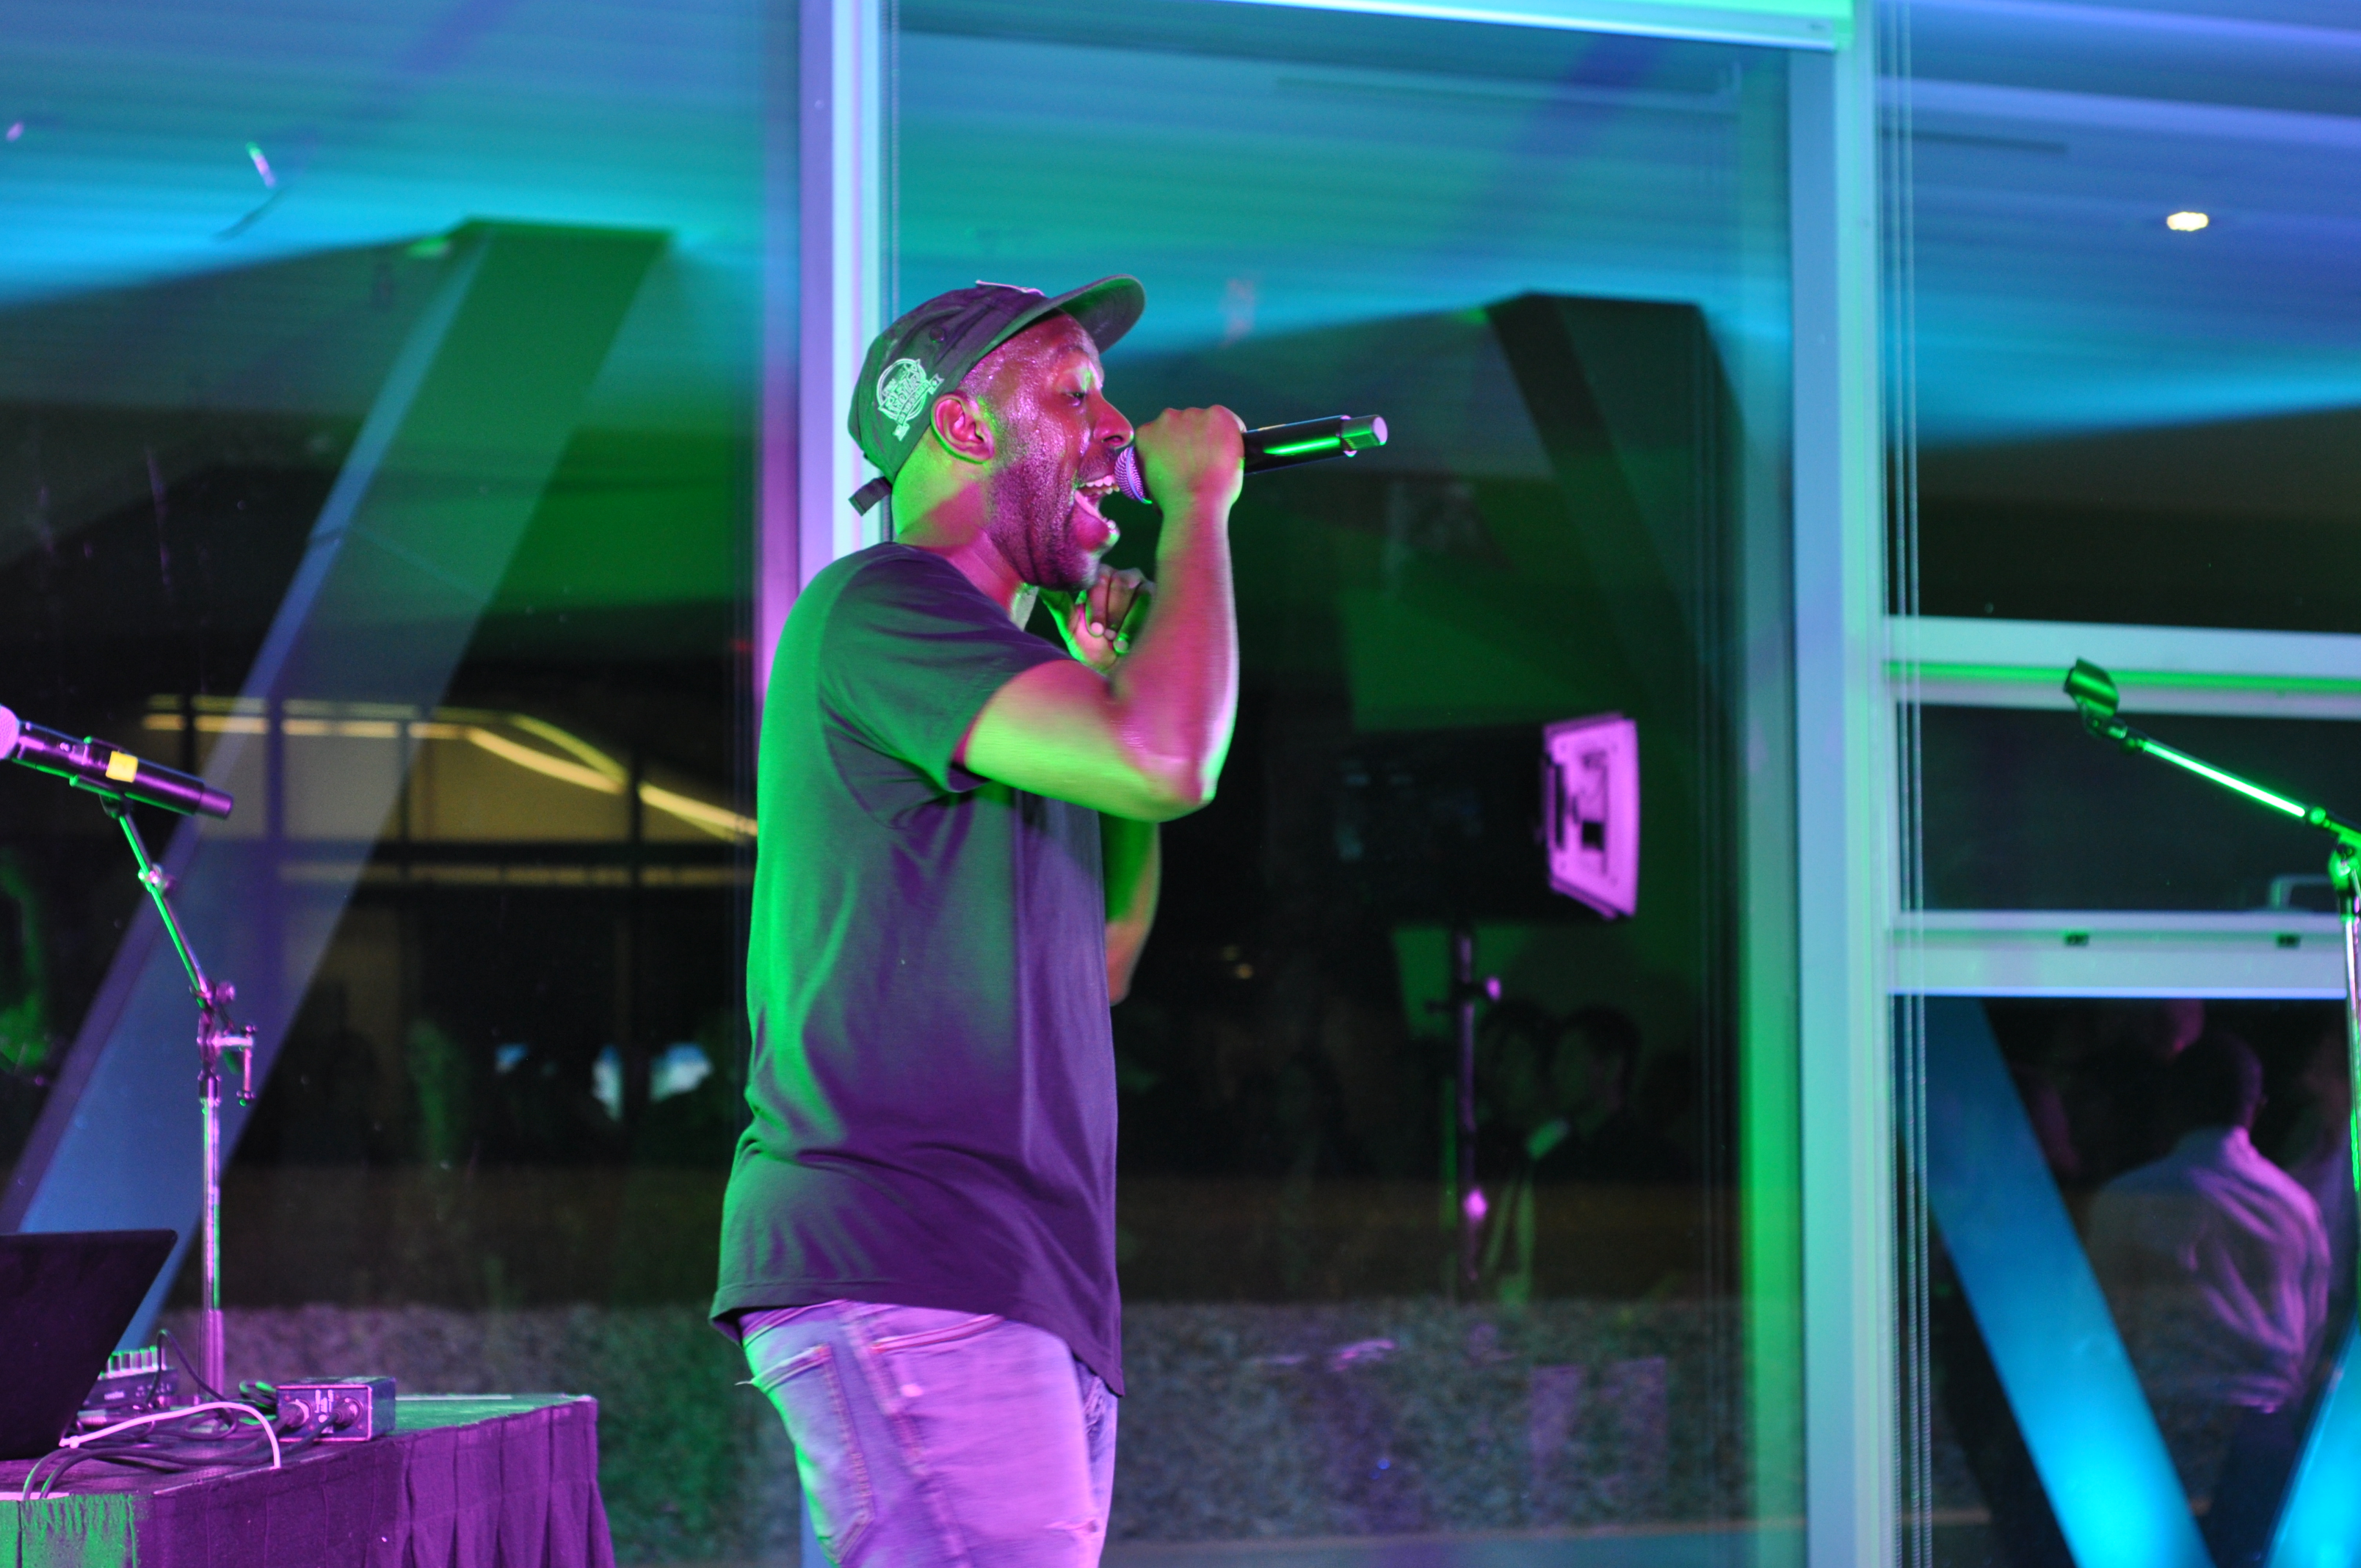 Hip hop artist Shad performing at Perimeter Institute for the PSI graduation of 2014